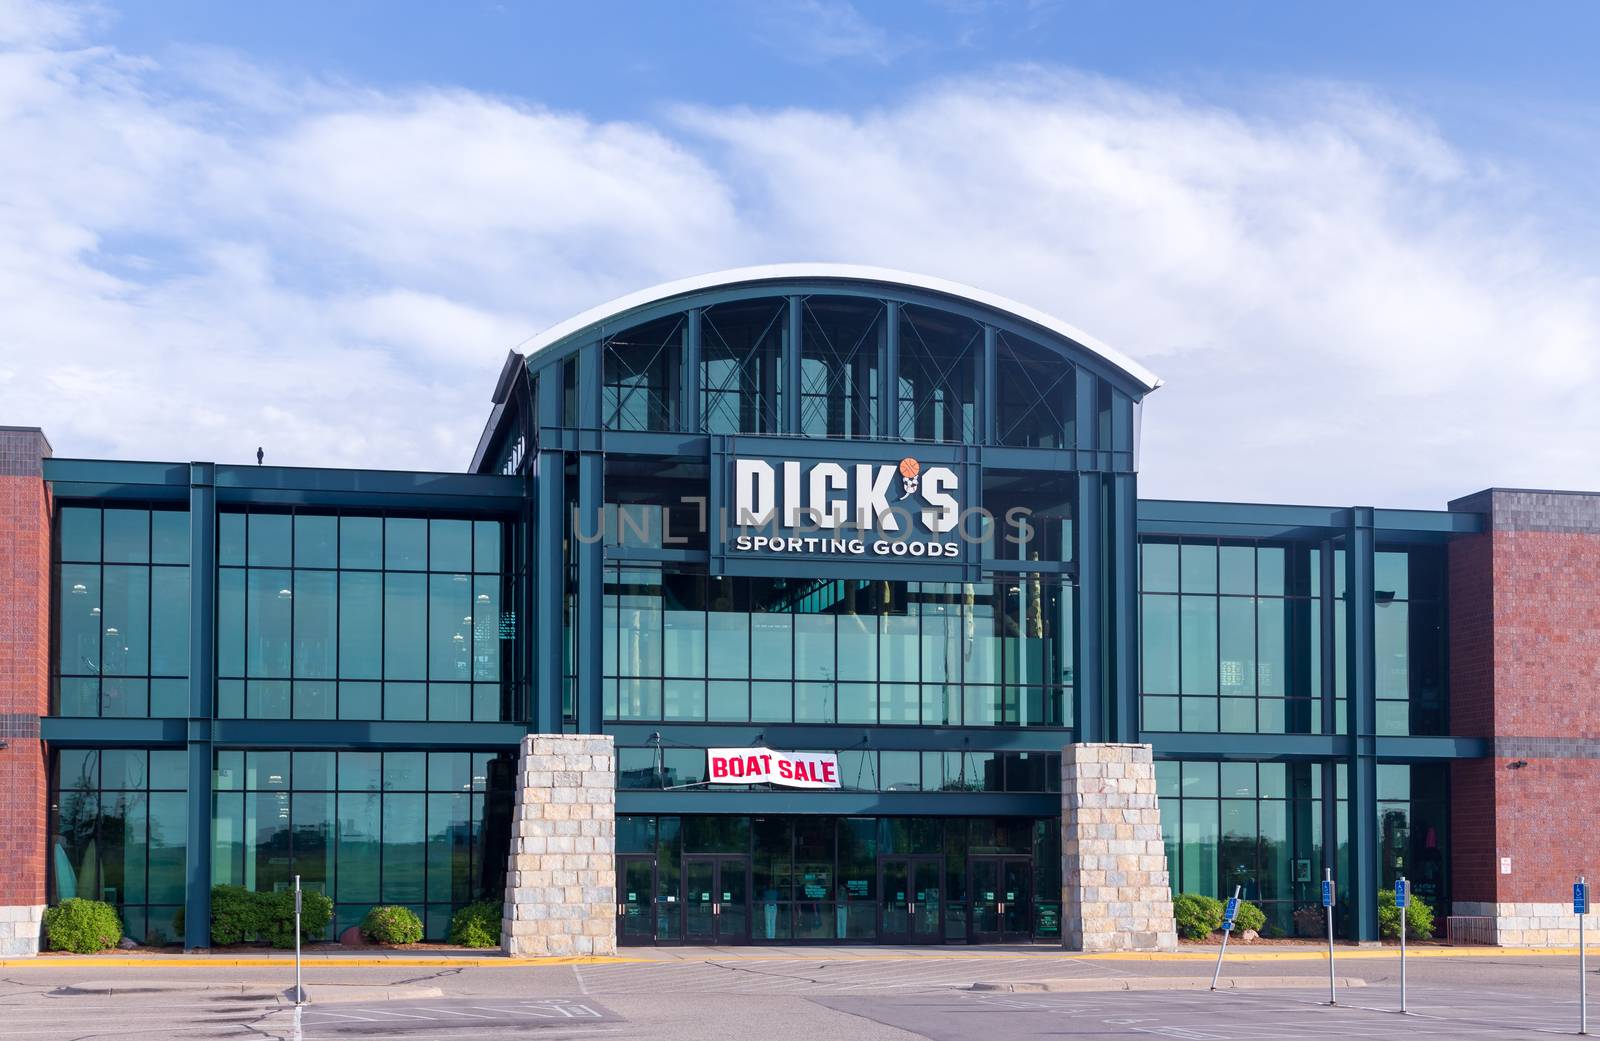 RICHFIELD, MN/USA - MAY 30, 2016: Dick's Sporting Goods exterior. Dick's Sporting Goods, Inc. is a Fortune 500 American corporation in the sporting goods and retail industries.